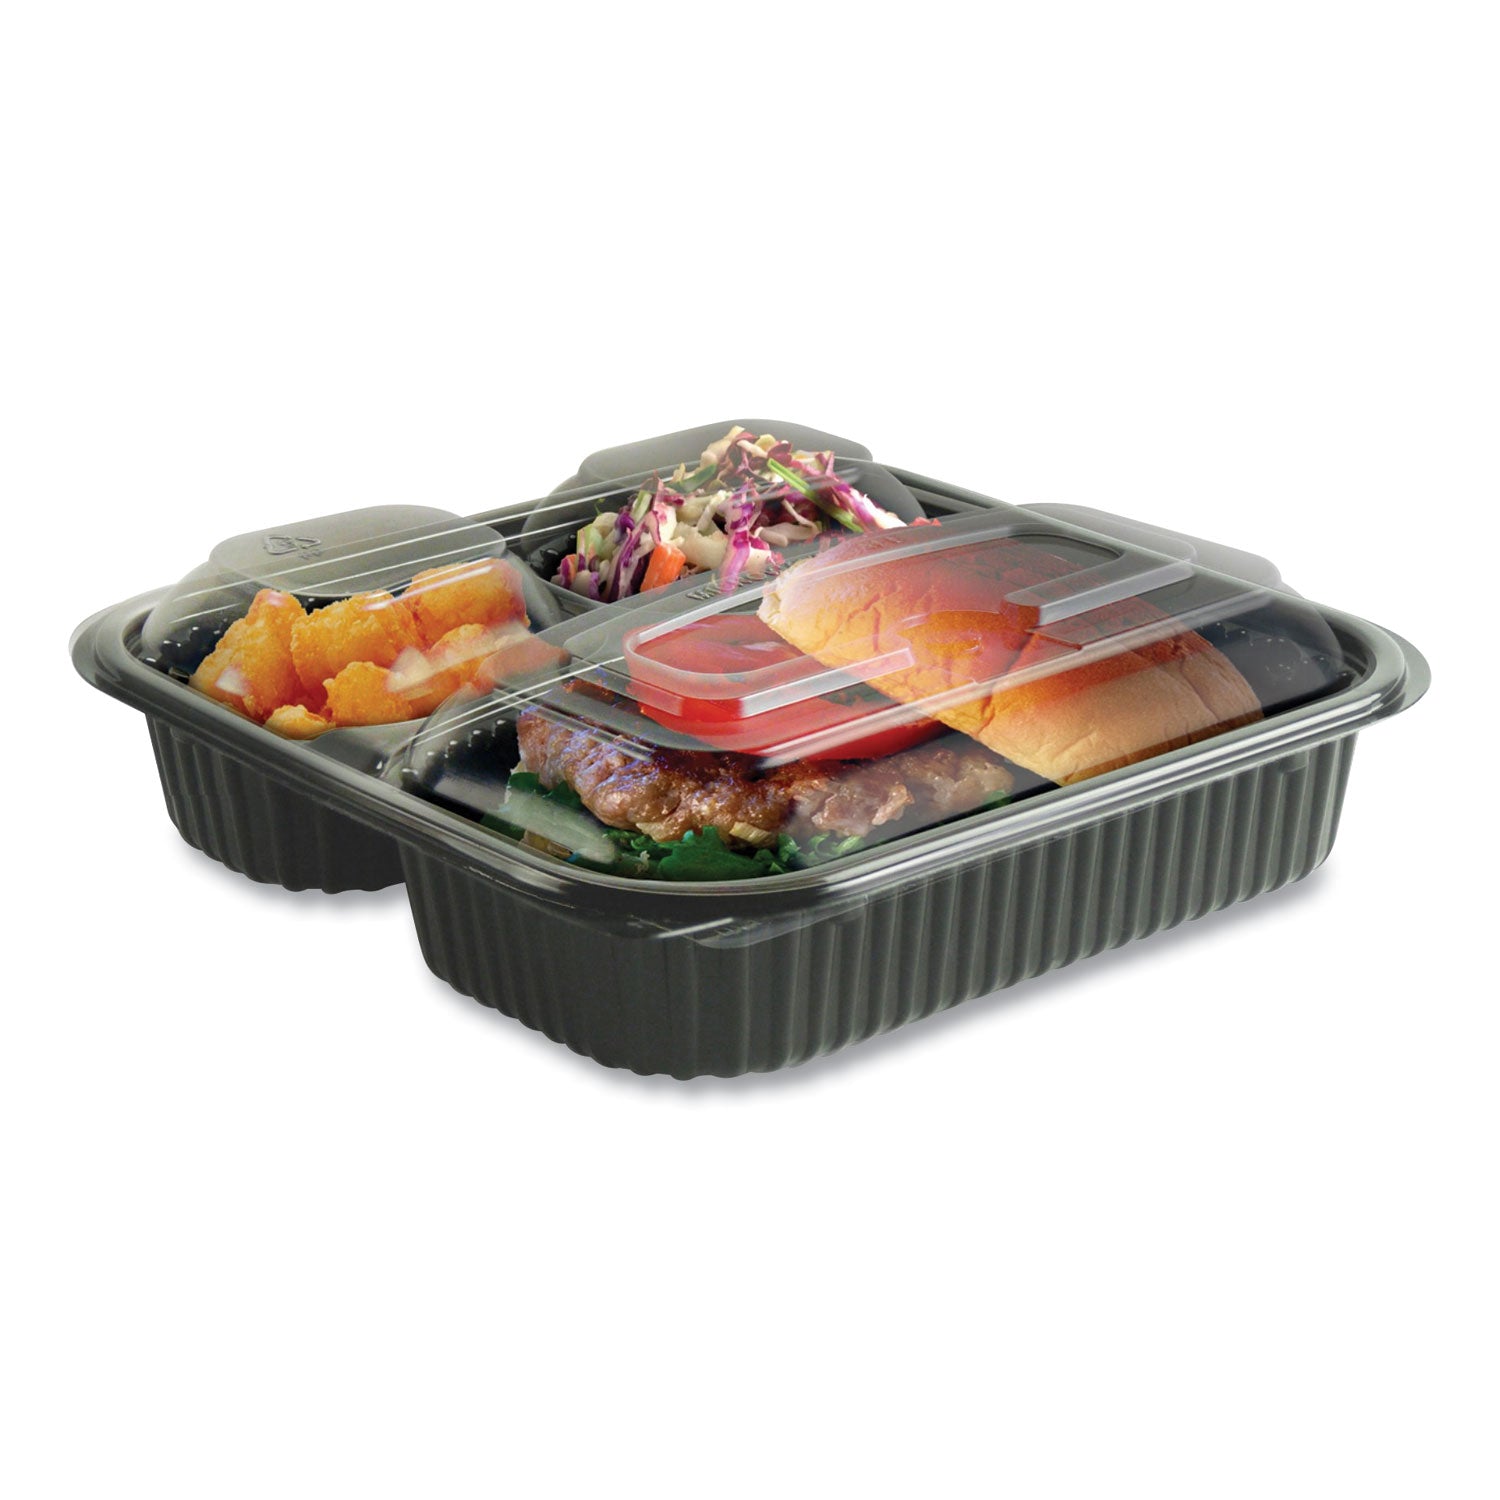 culinary-squares-2-piece-3-compartment-microwavable-container-21-oz-6-oz-6-oz-846-x-846-x-25-clear-blk-plastic-150-ct_anz4118523 - 1